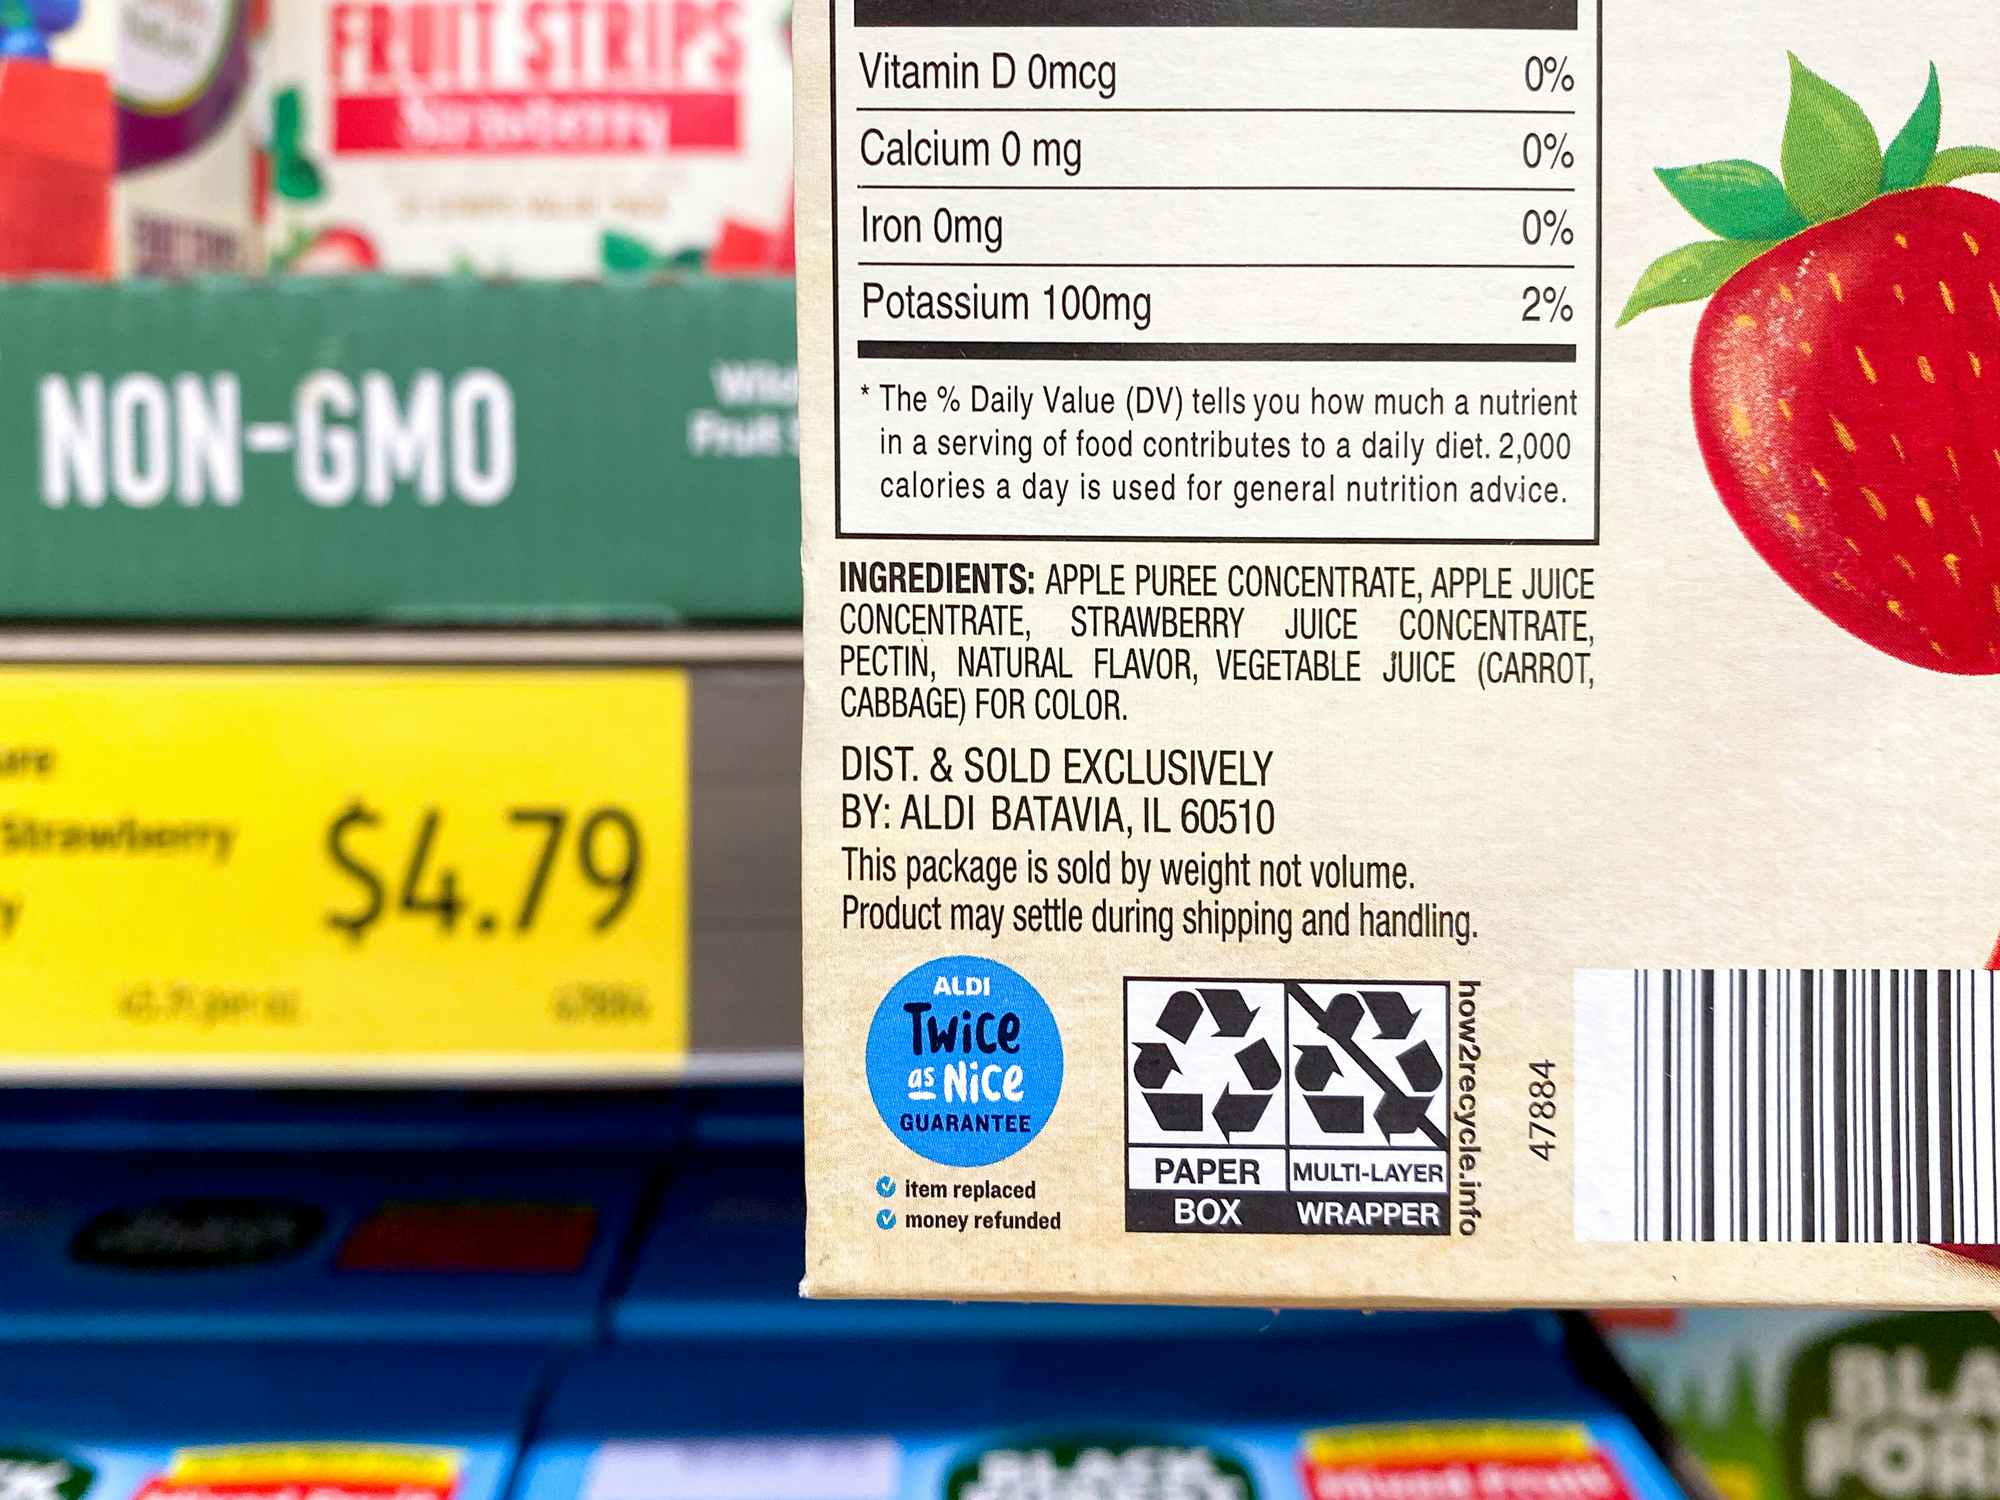 nutrition label on simply nature non-gmo fruit strips from aldi